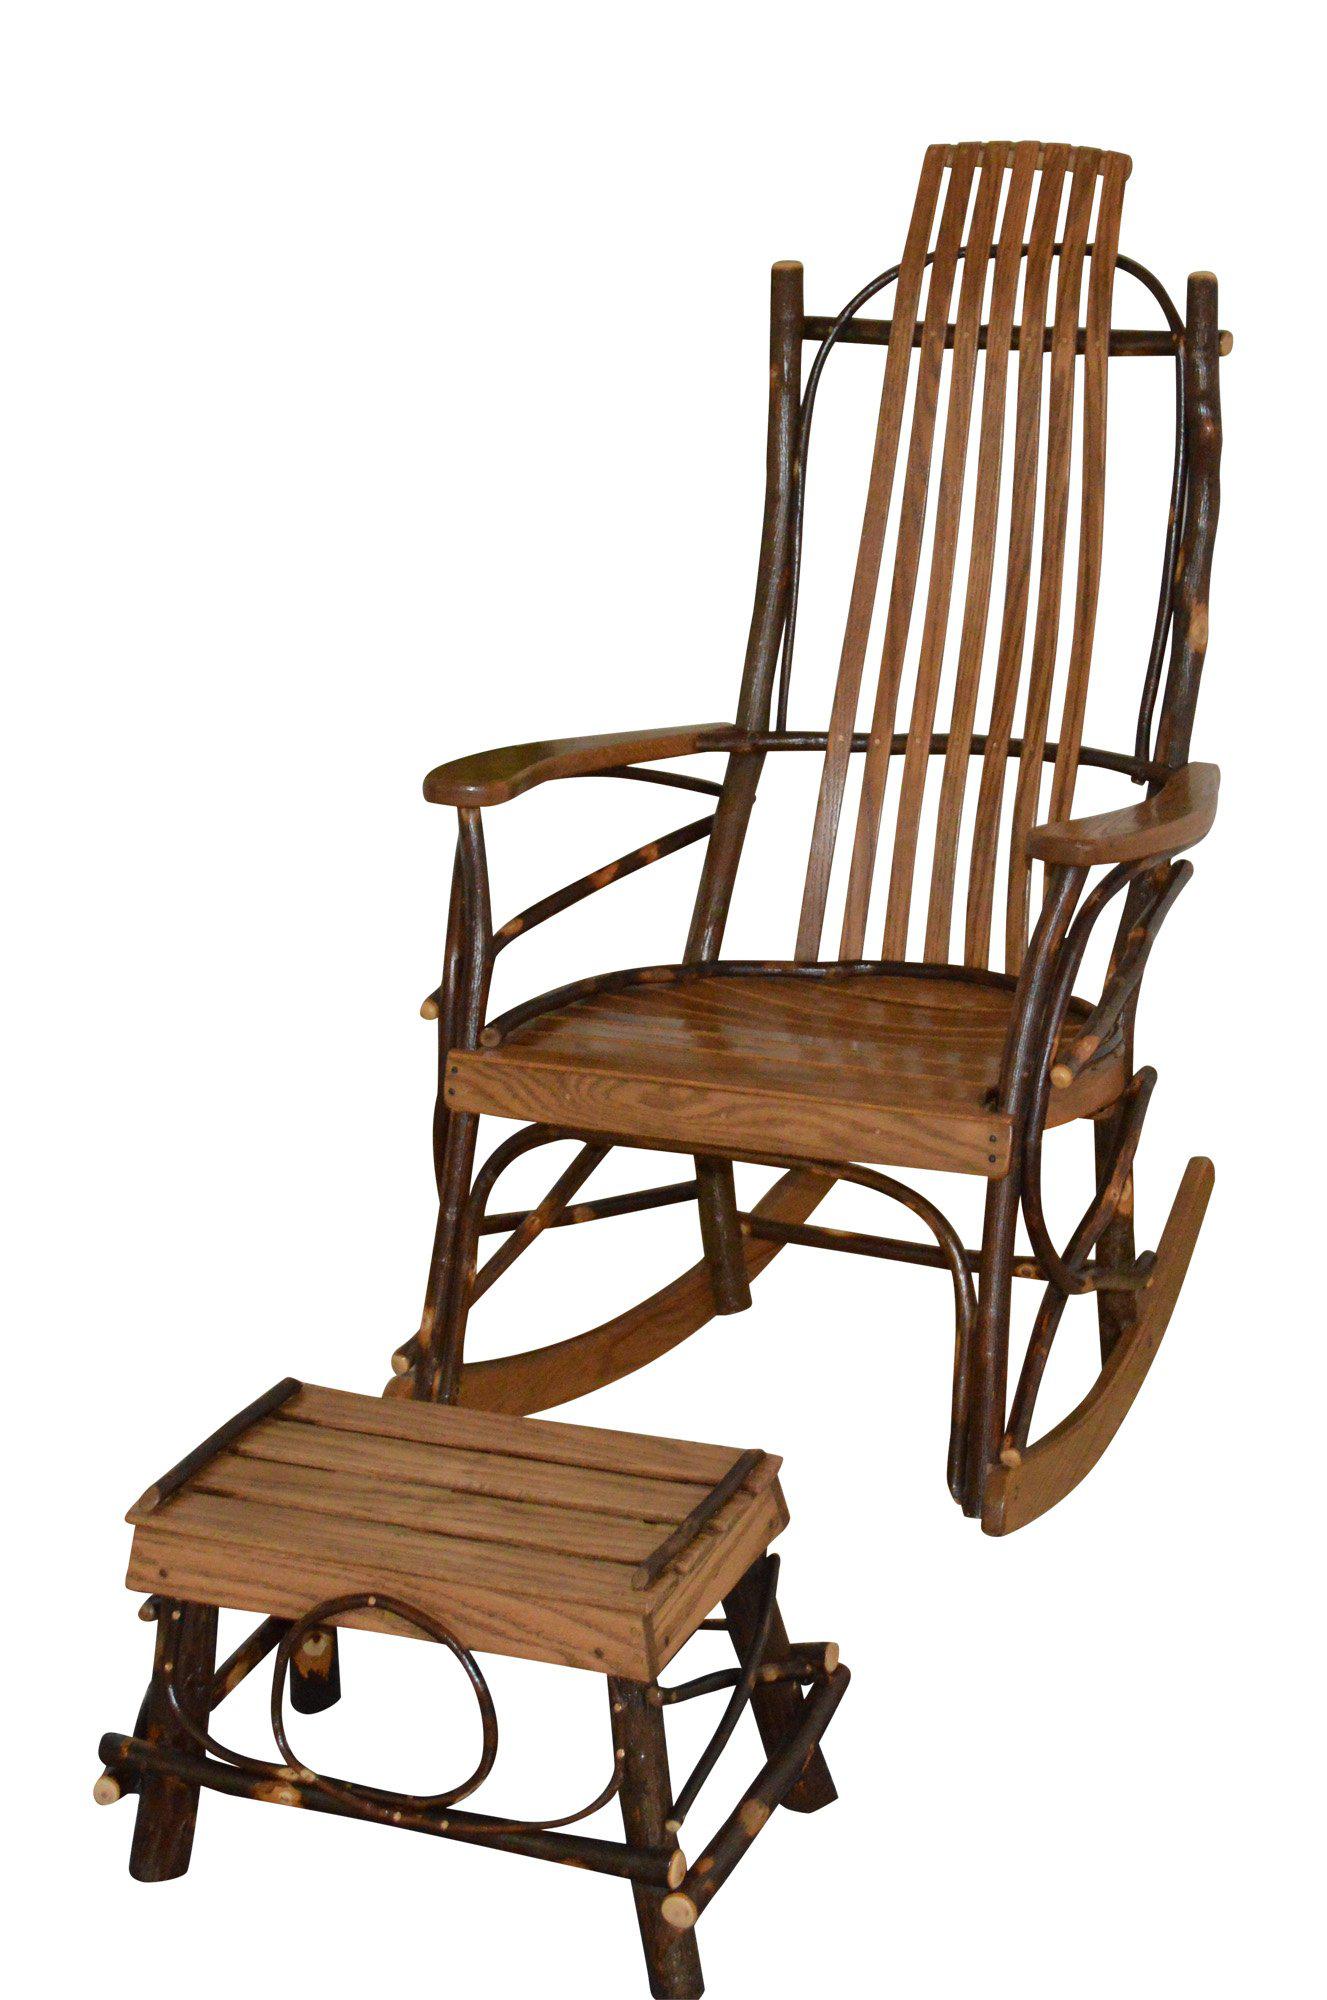 A&L Furniture Co. Amish Bentwood. 7-Slat Hickory Rocking Chair With Foot Stool Set - LEAD TIME TO SHIP 4 WEEKS OR LESS